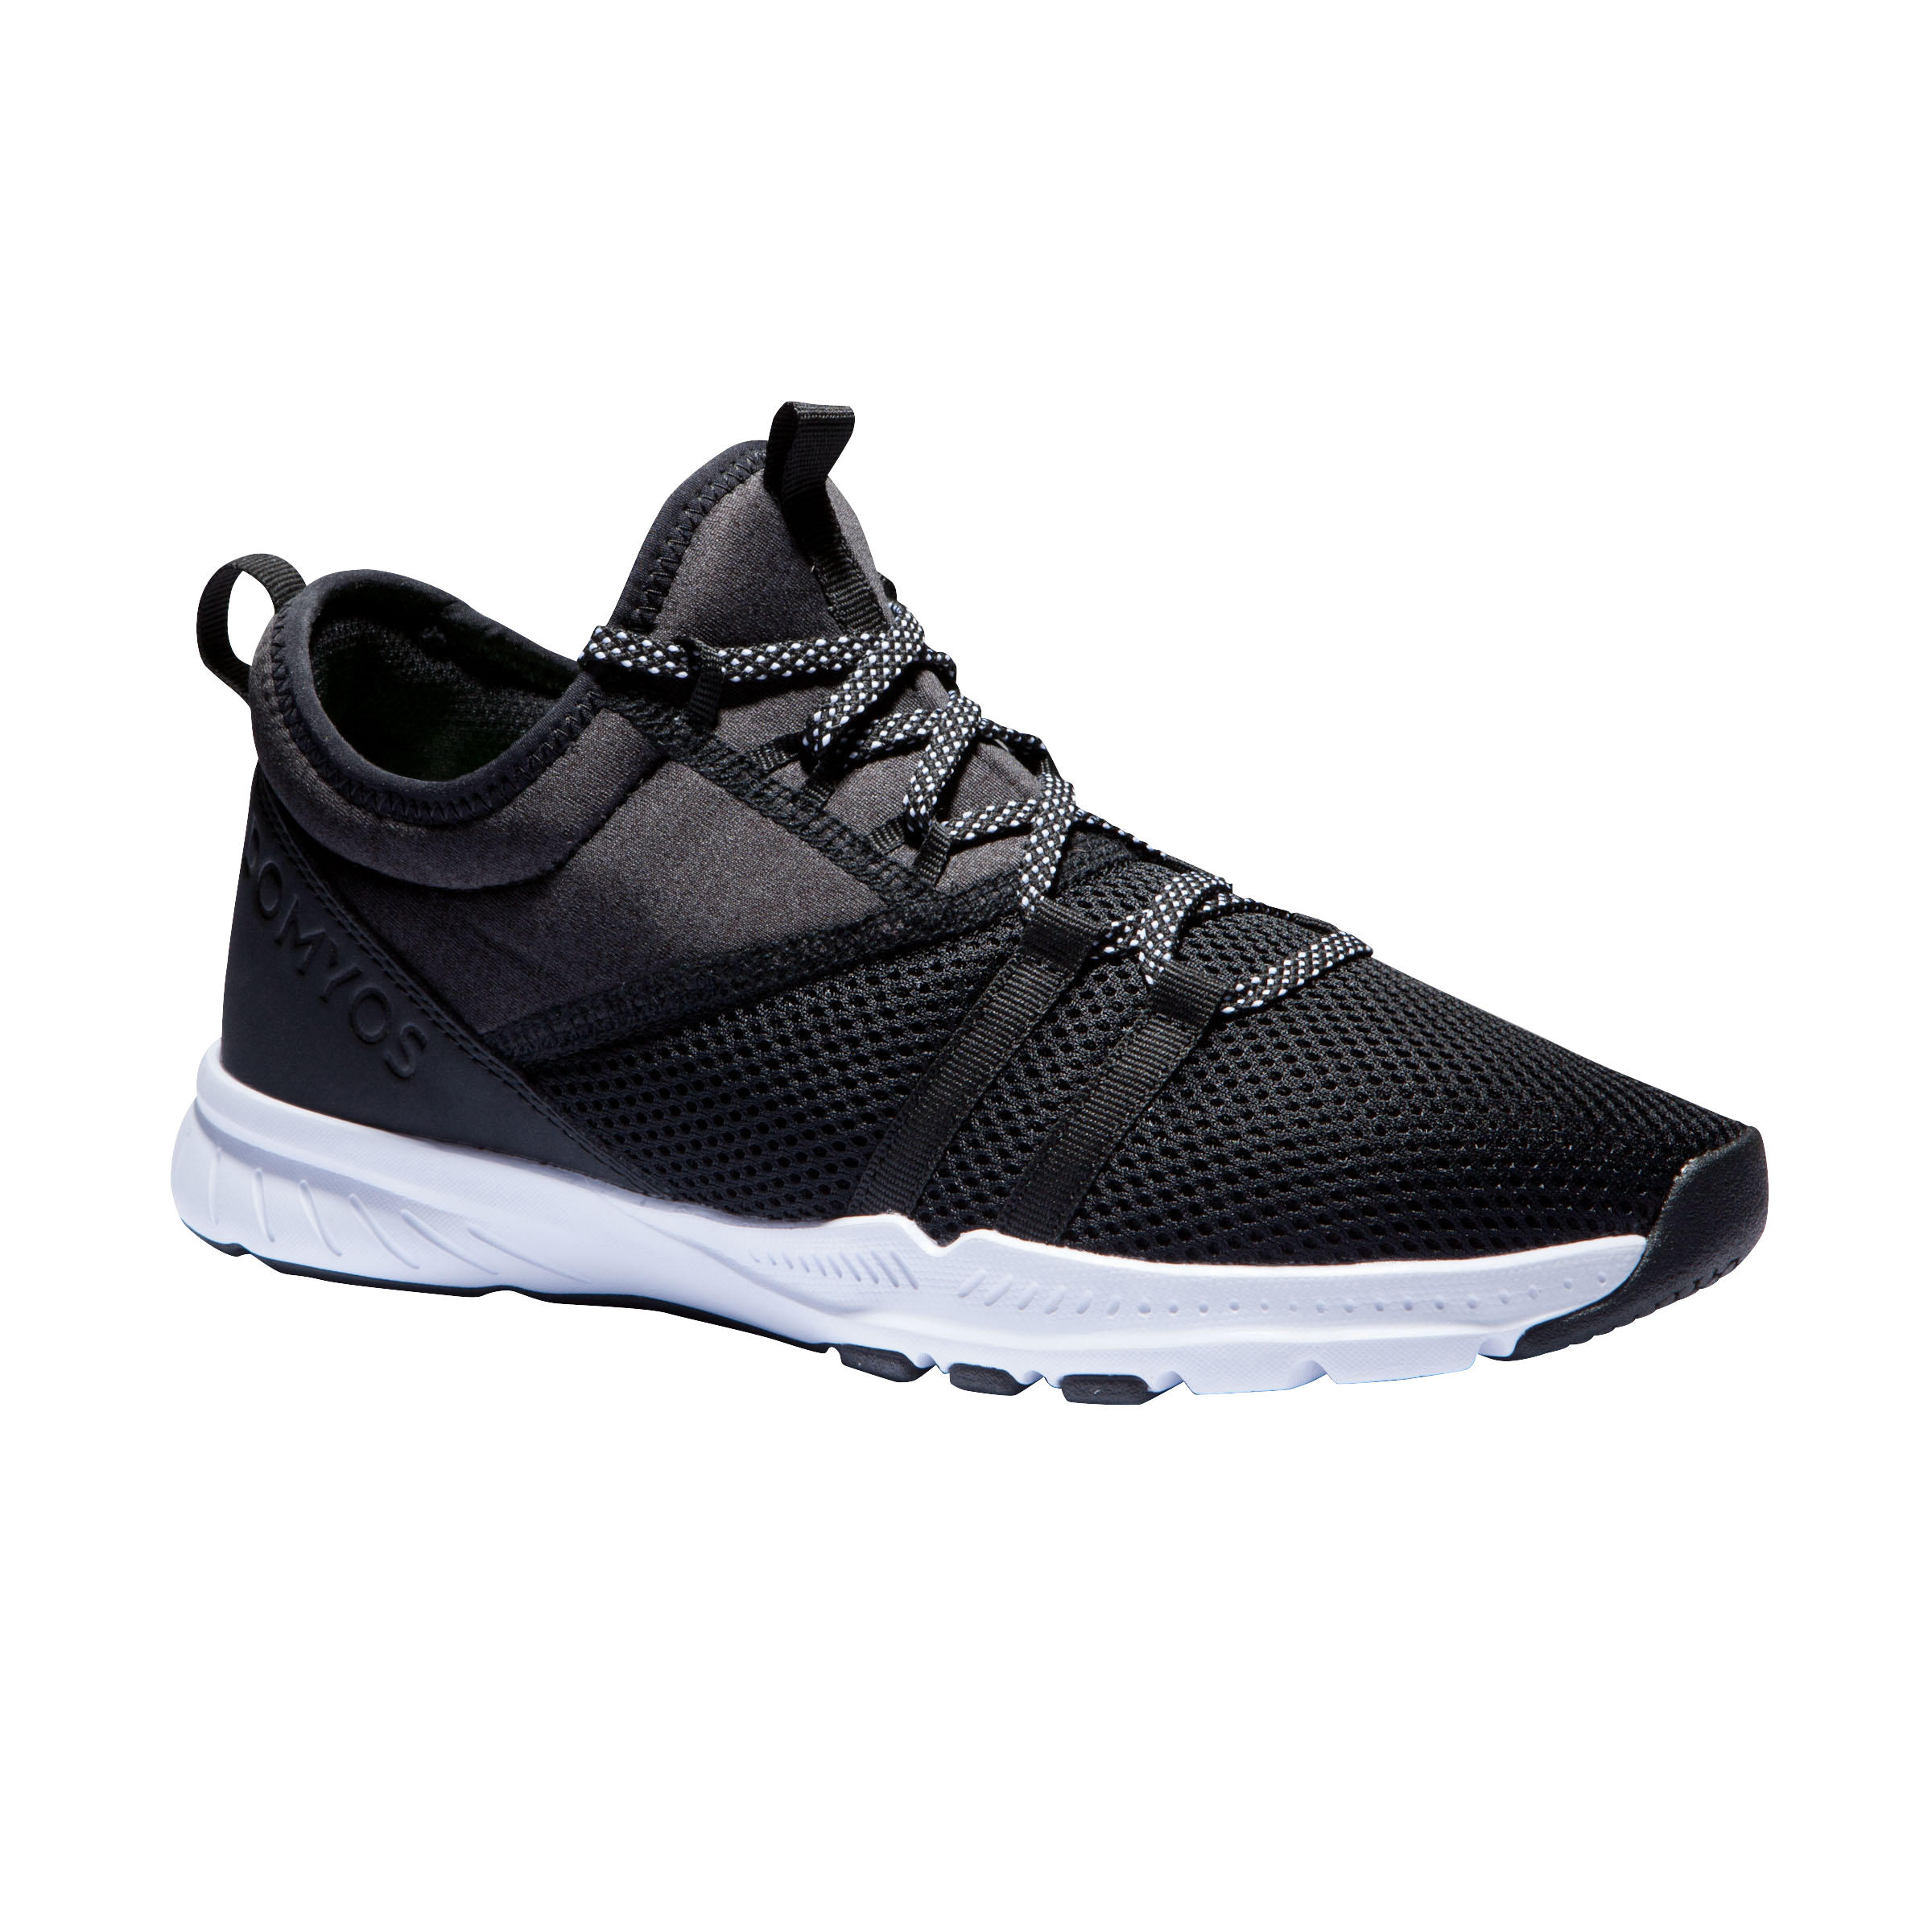 decathlon sports shoes for women